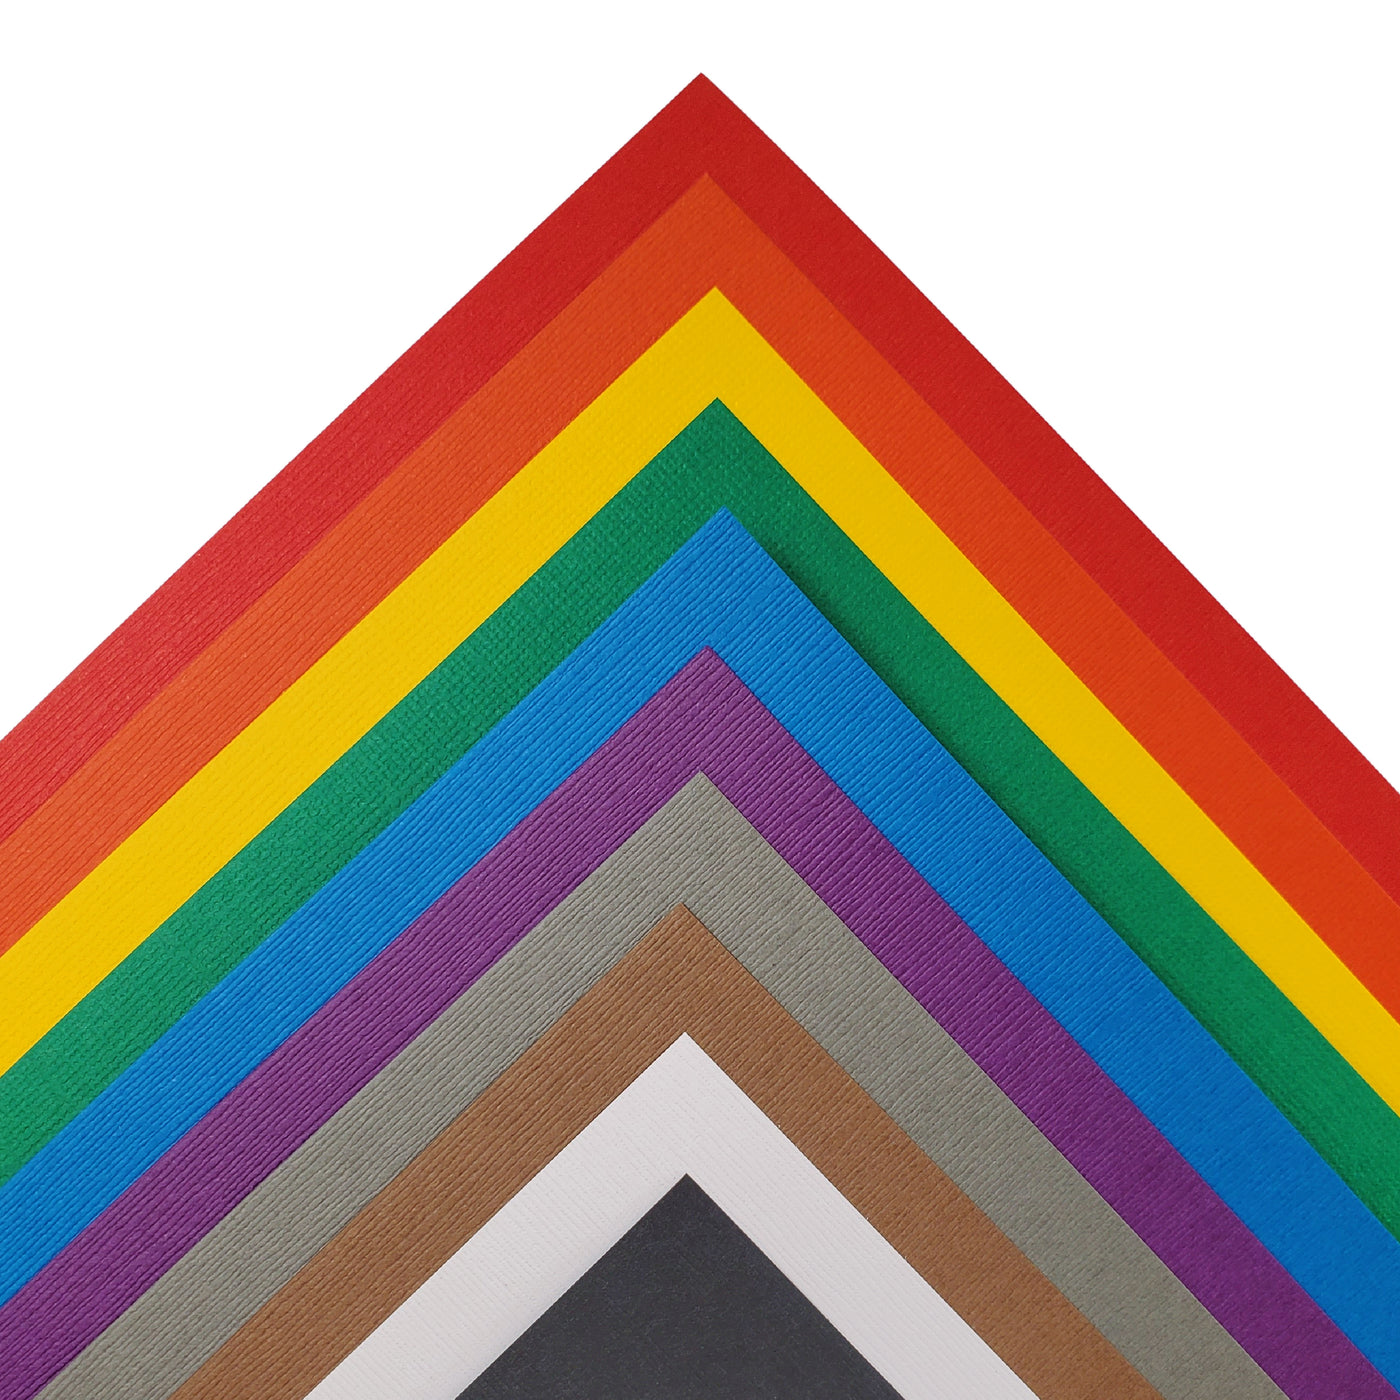 Classic Rainbow assortment includes one (1) each of ten (10) bright, rainbow colors of Bazzill textured cardstock.